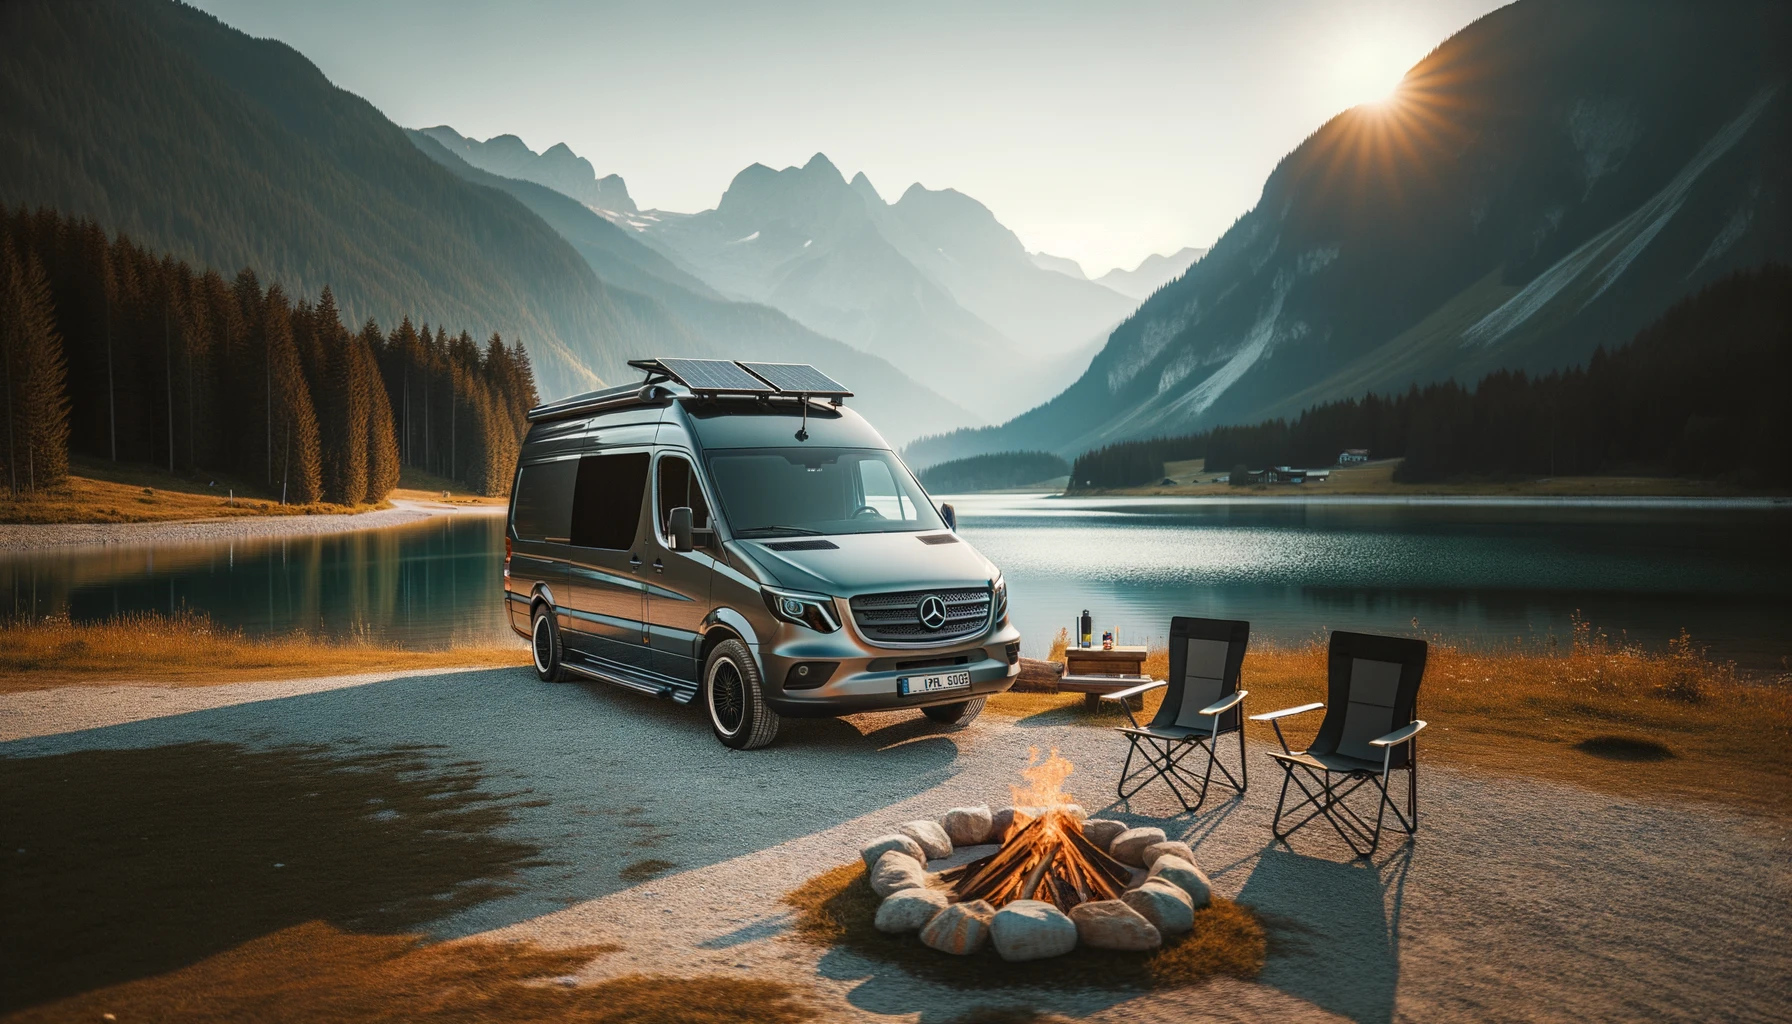 Photo of a sleek sprinter campervan parked by a scenic lakeside with mountains in the background.